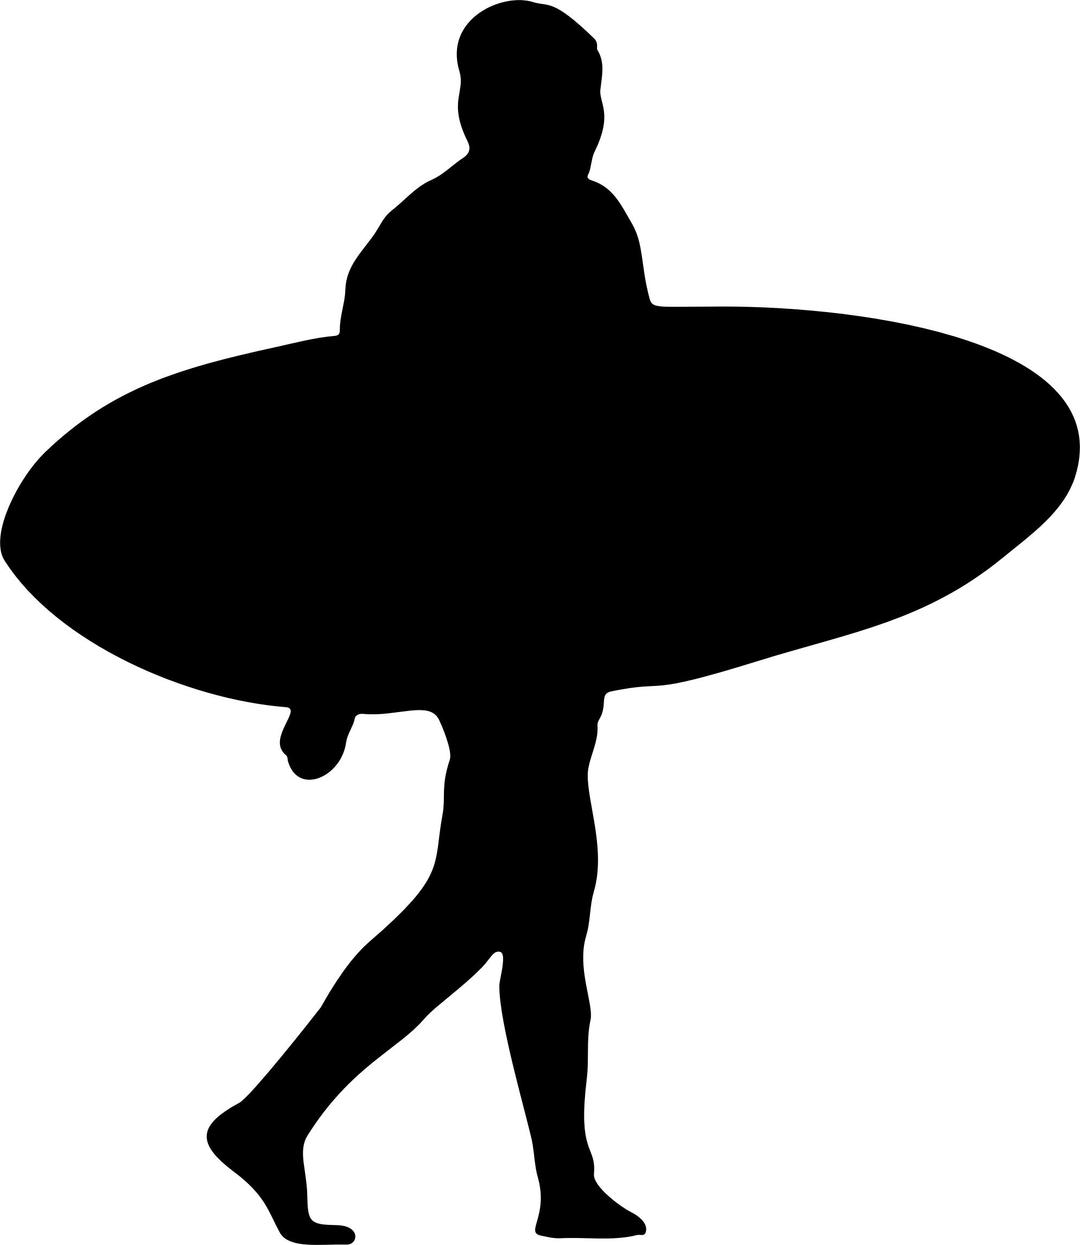 Man Carrying Surfboard Silhouette png transparent